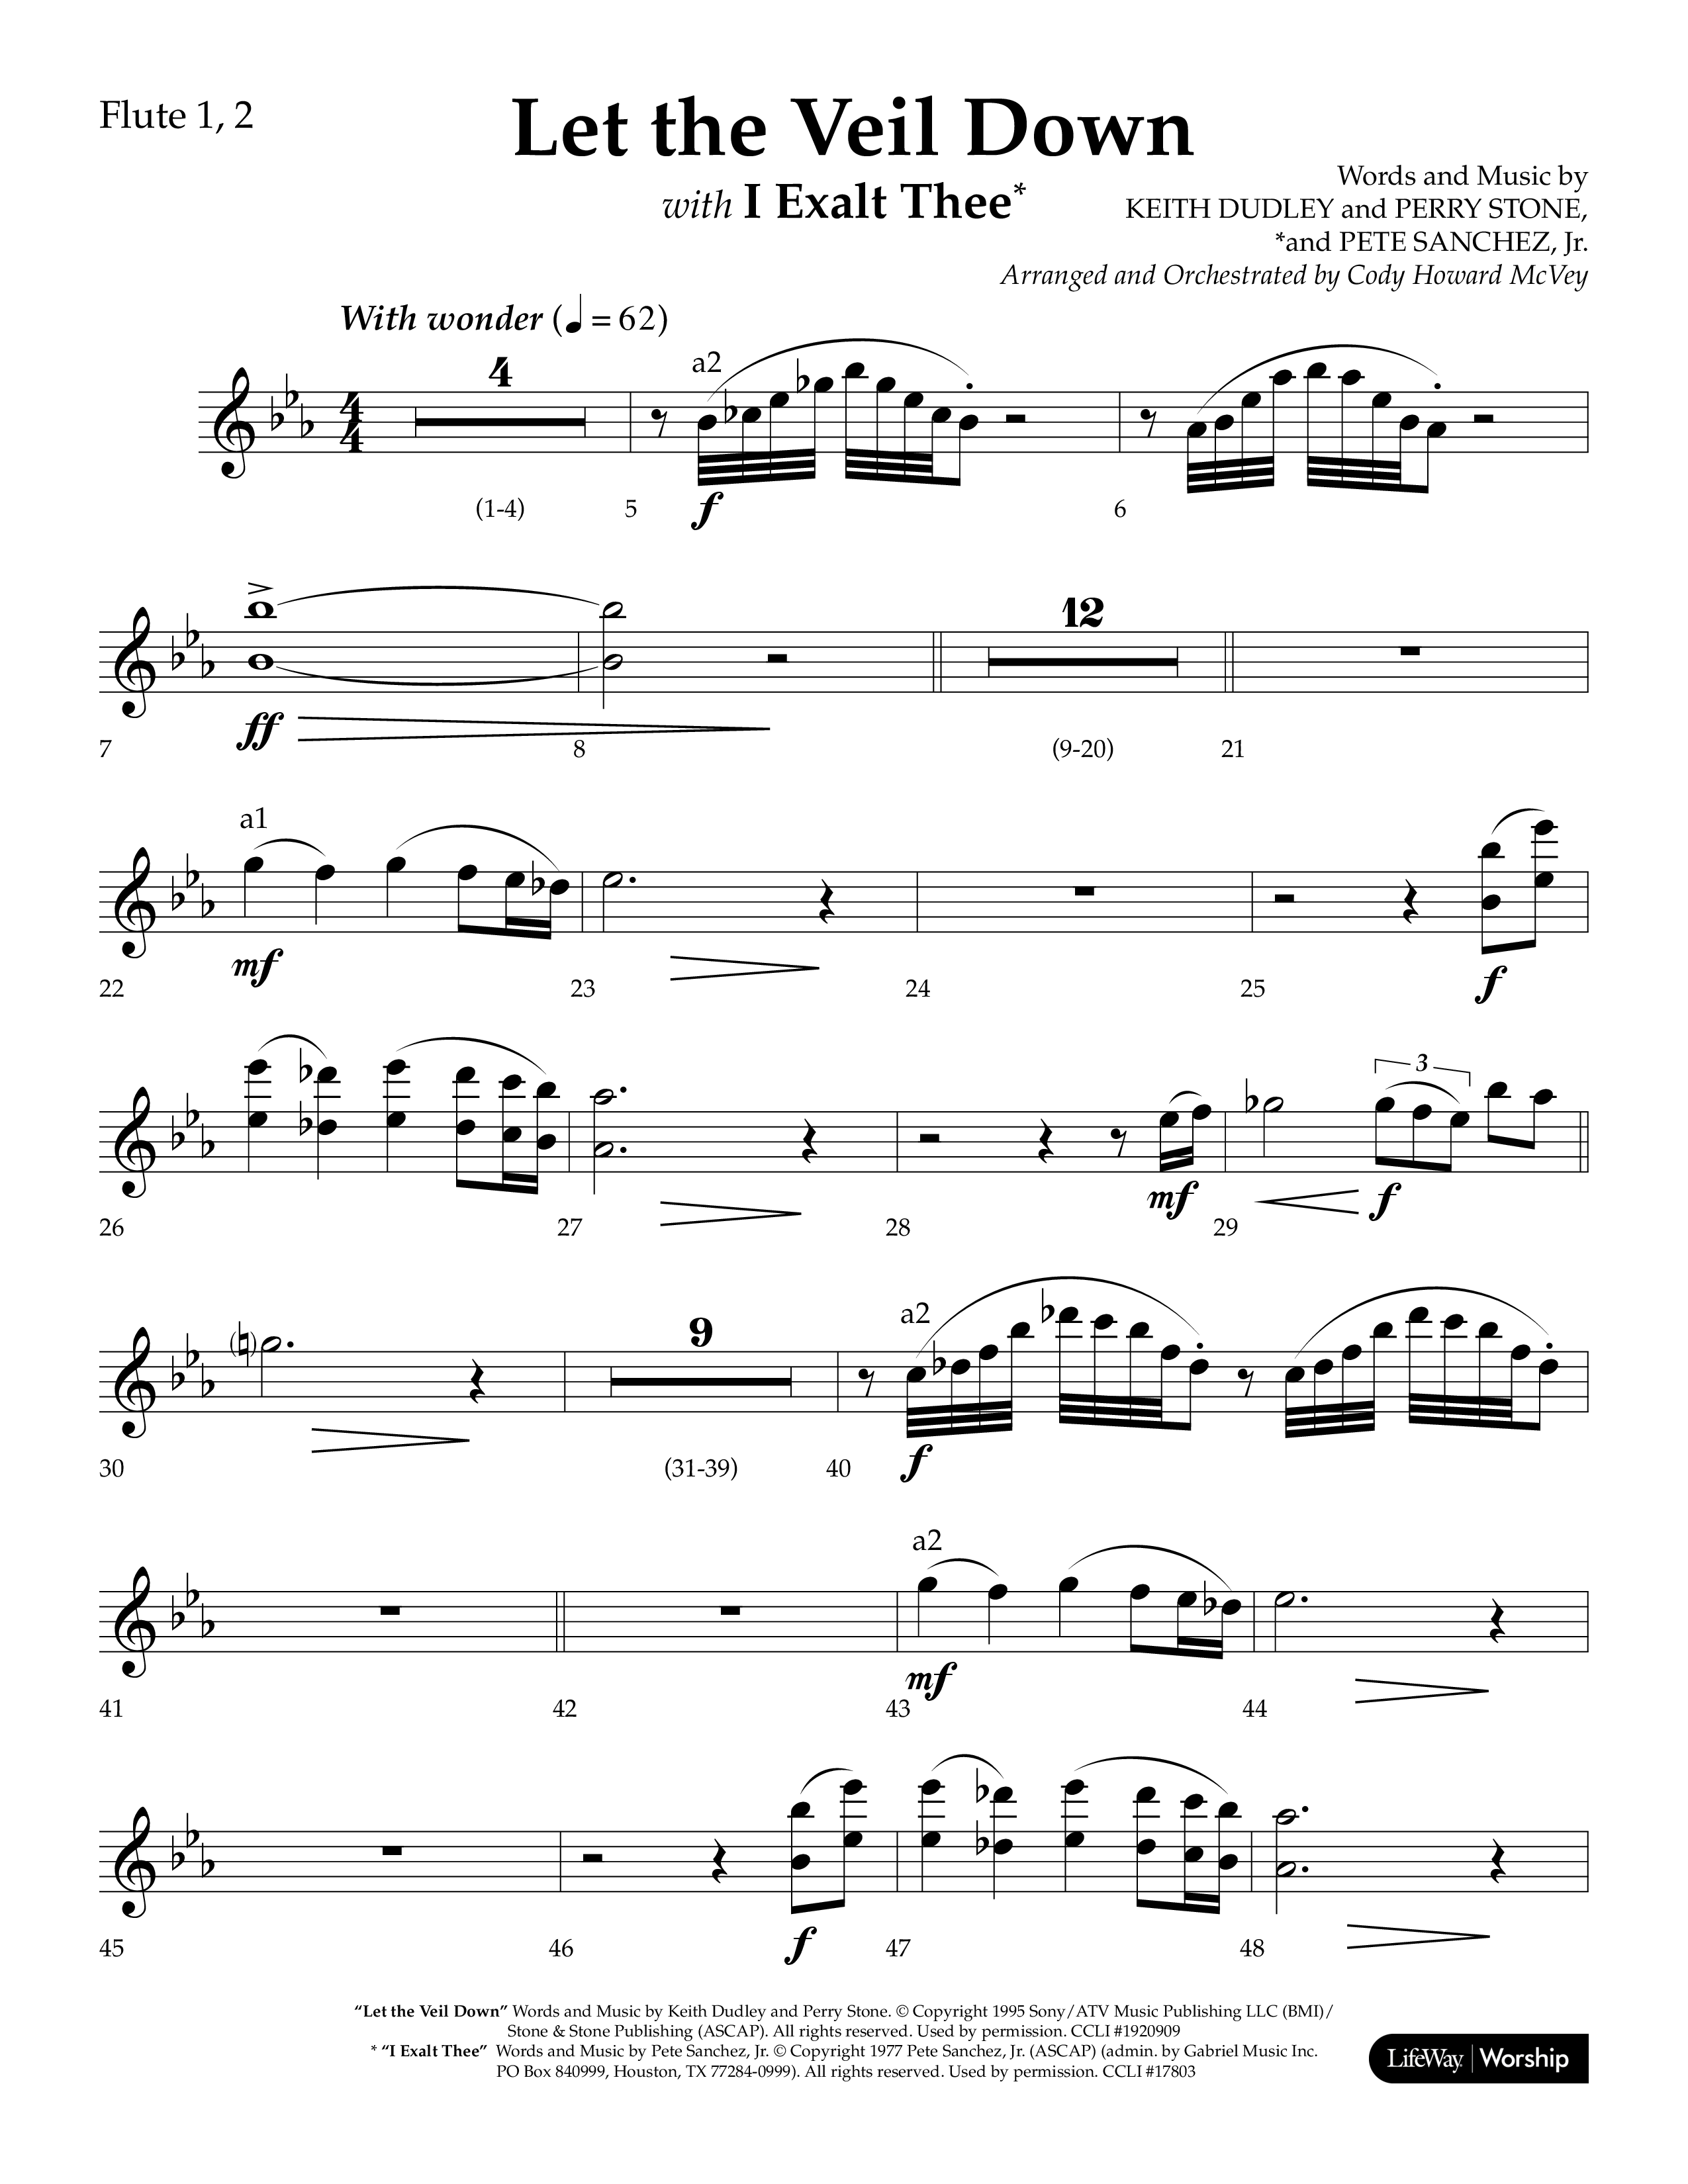 Let The Veil Down with I Exalt Thee (Choral Anthem SATB) Flute 1/2 (Lifeway Choral / Arr. Cody McVey)